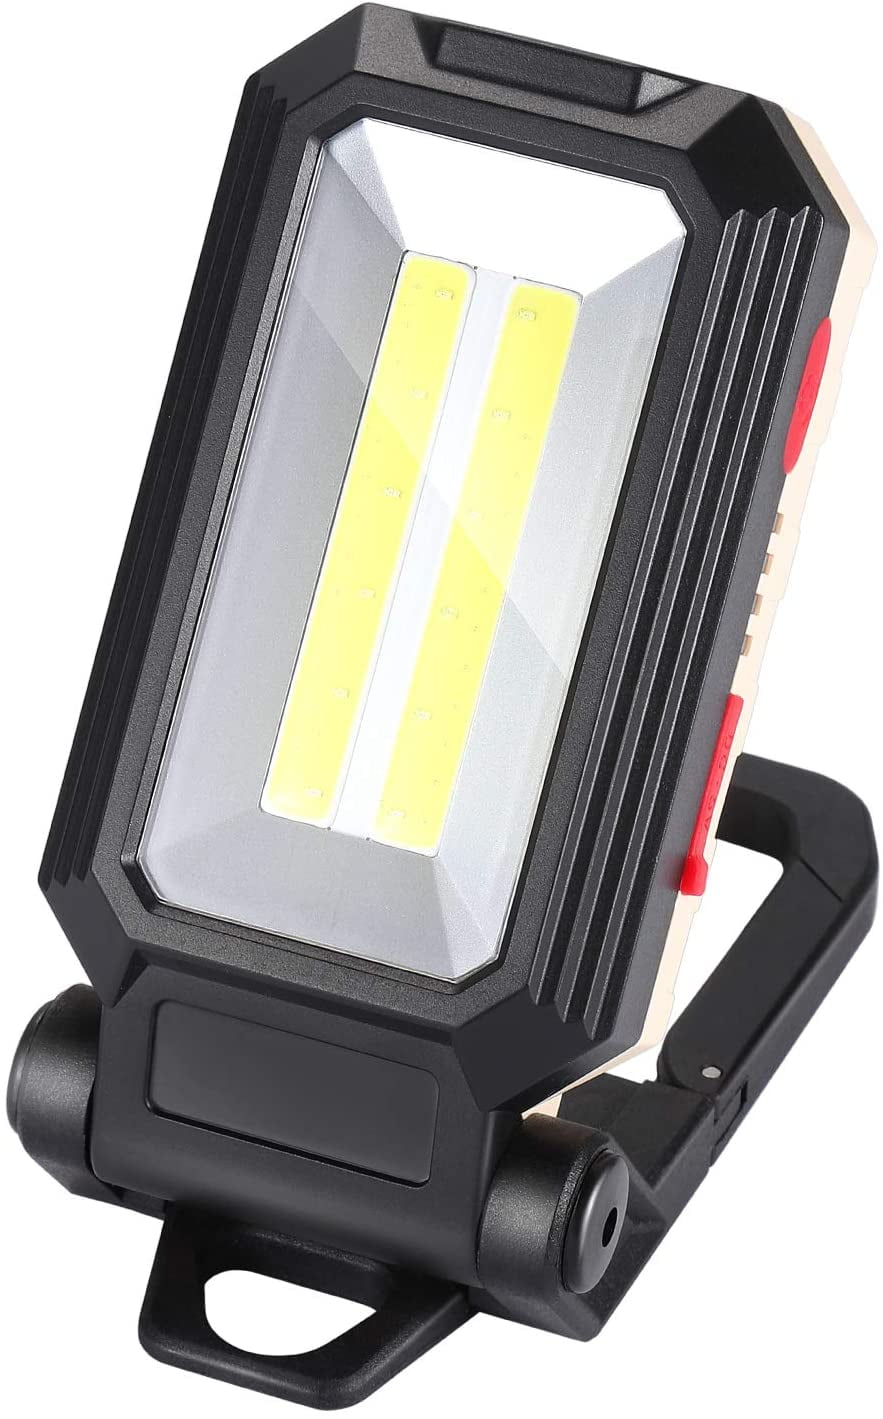 COB LED Work Light USB Rechargeable Camping Floodlight Emergency Lamp Stand 5W 